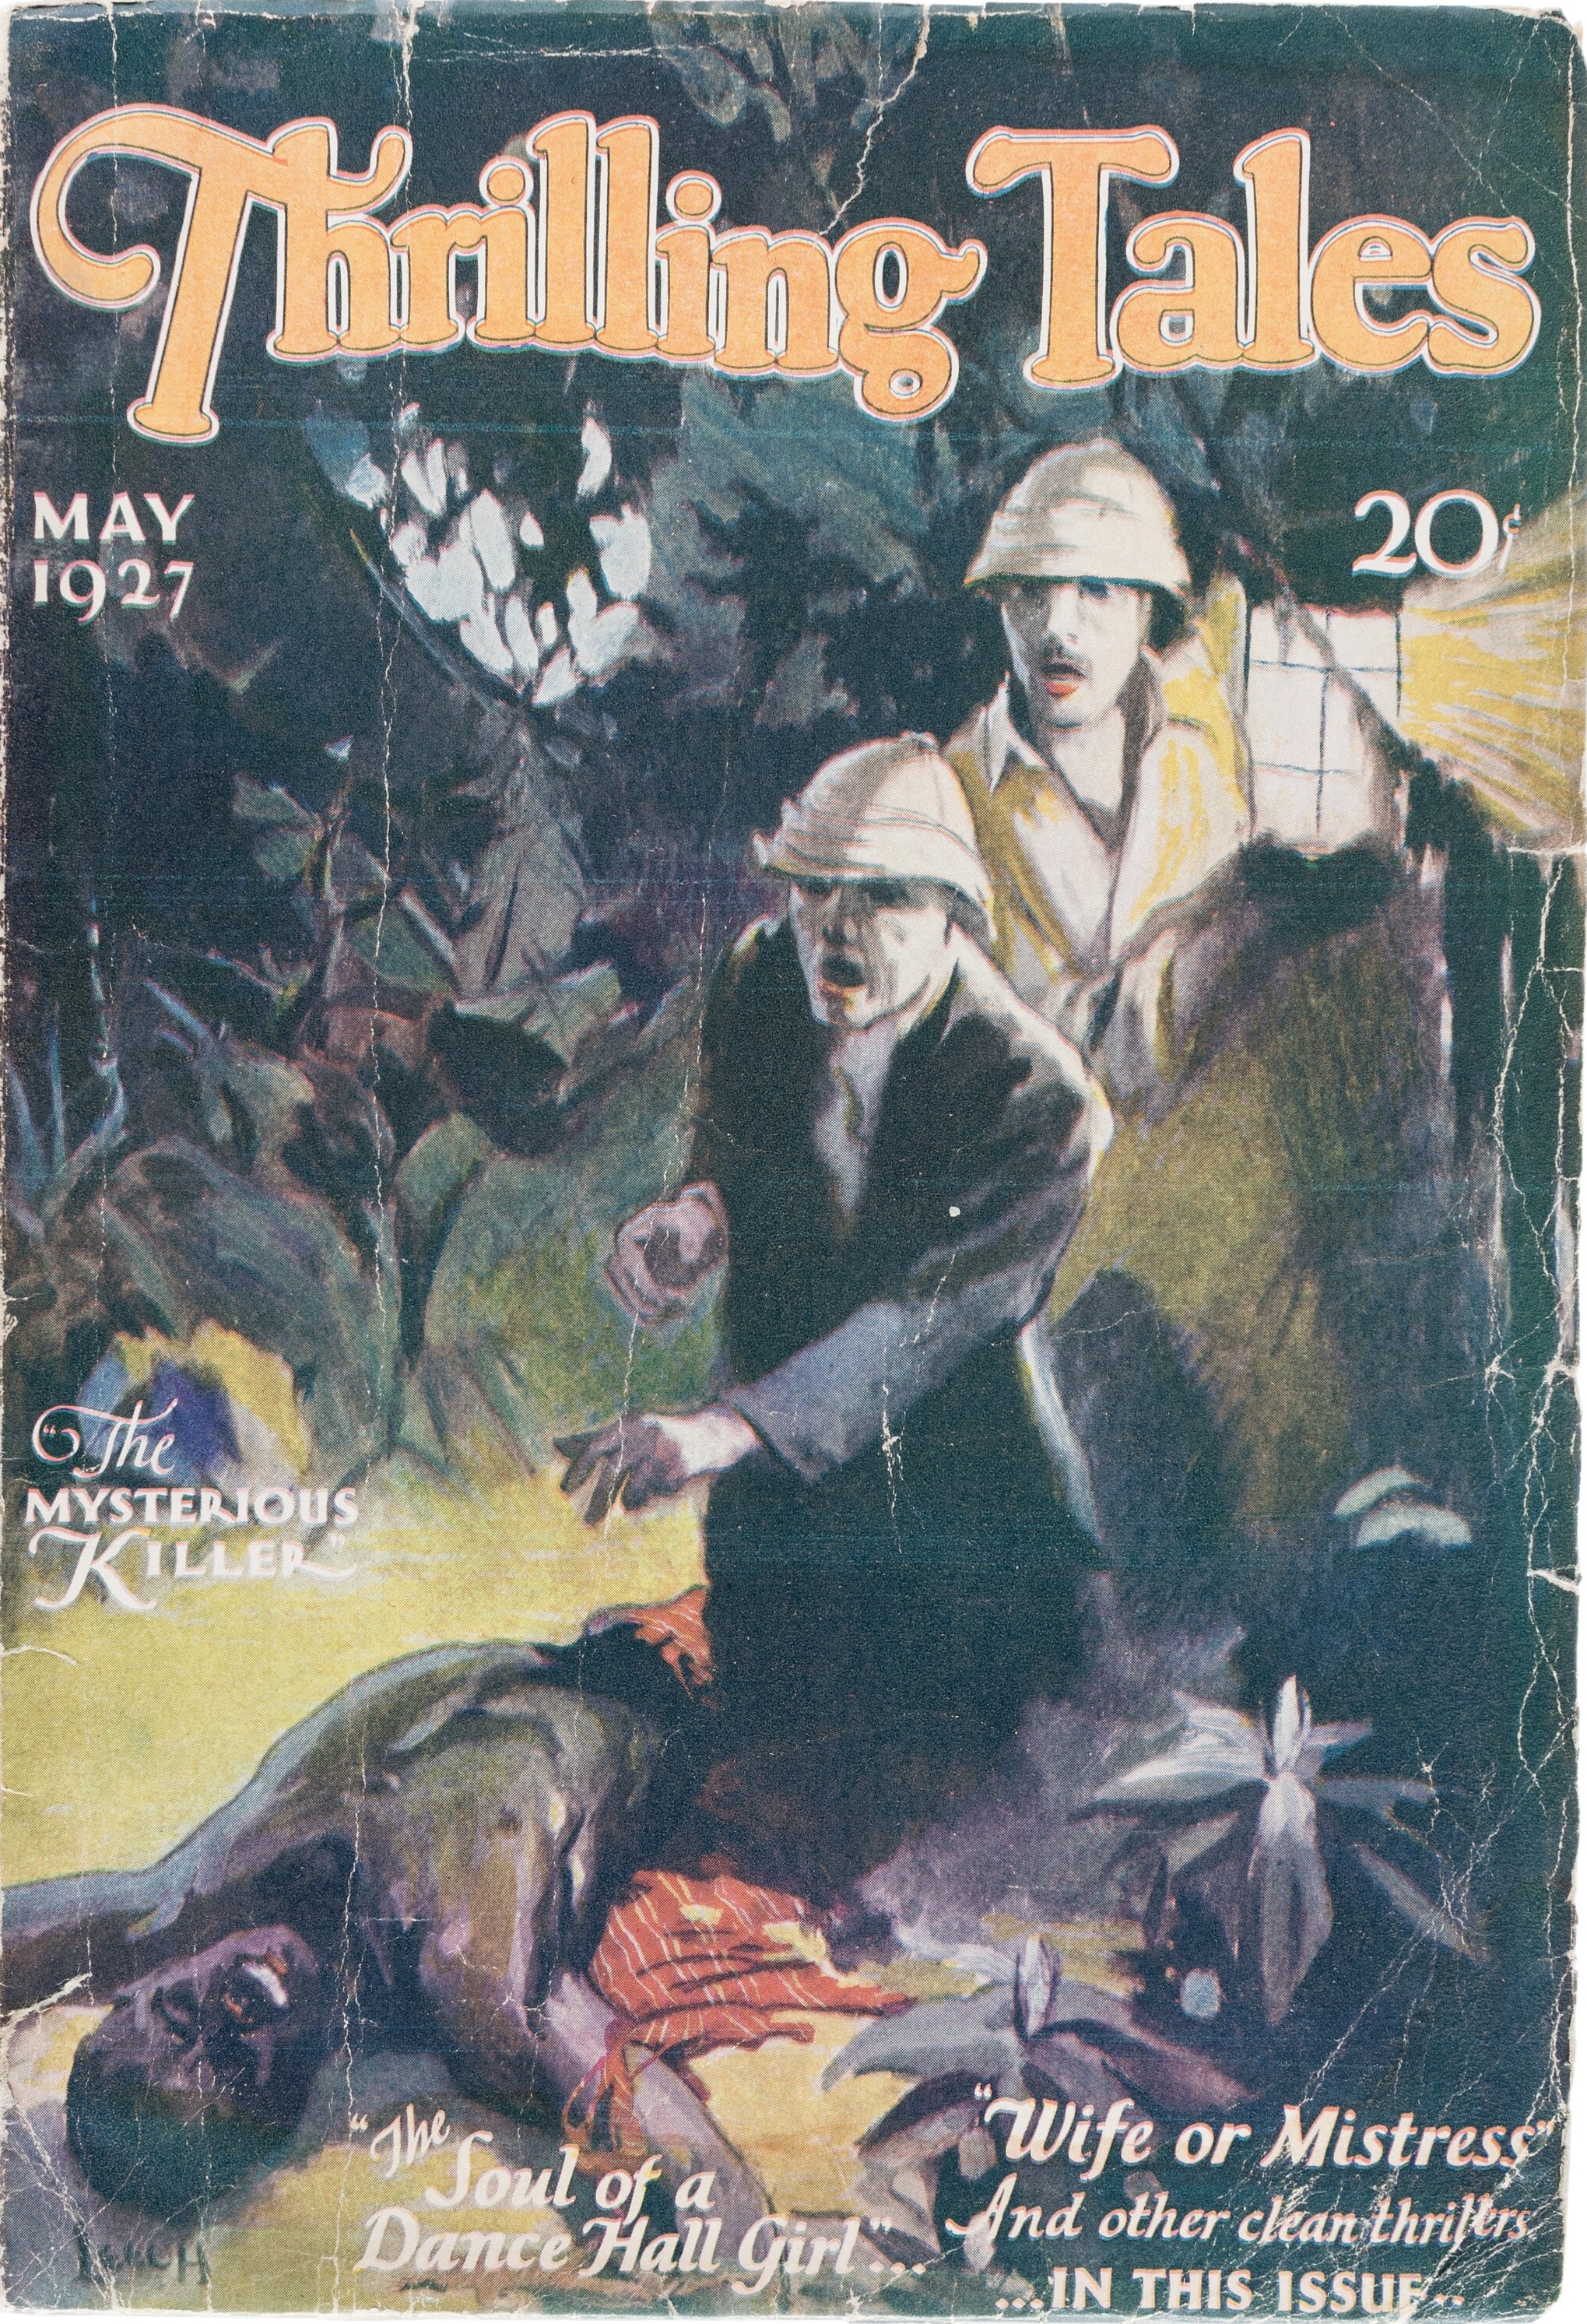 Thrilling Tales. May 1927